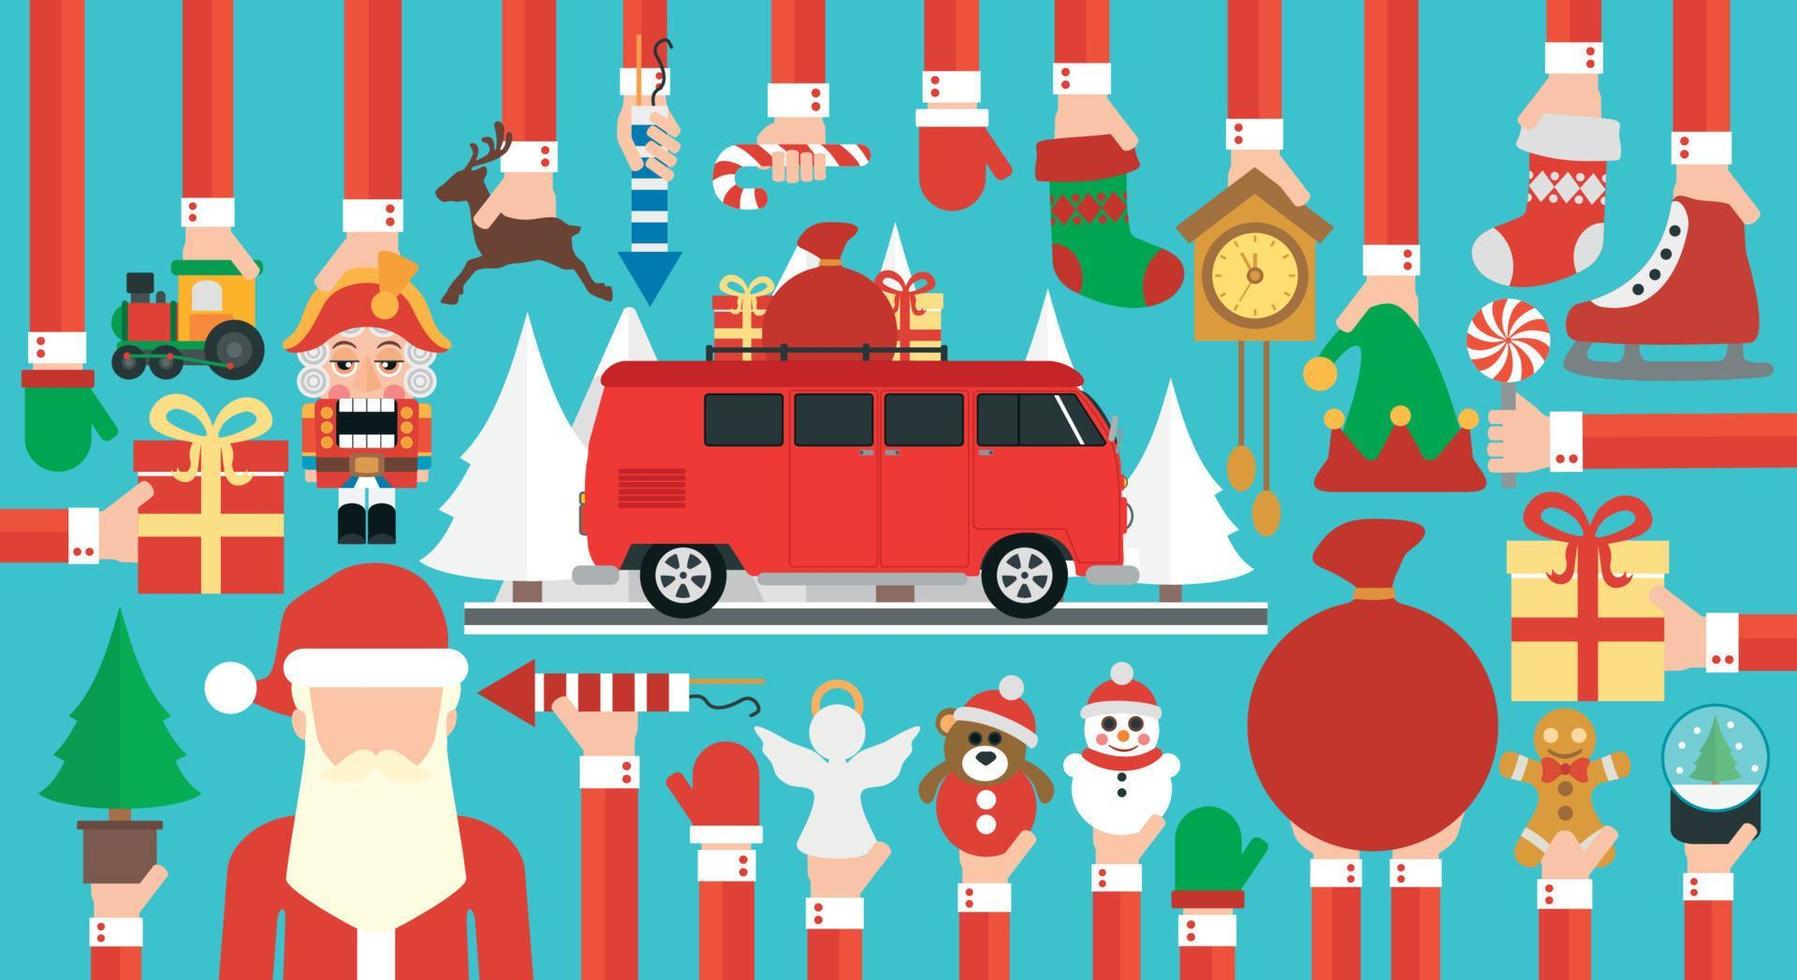 Merry Christmas design flat with christmas bus and Santa Claus vector